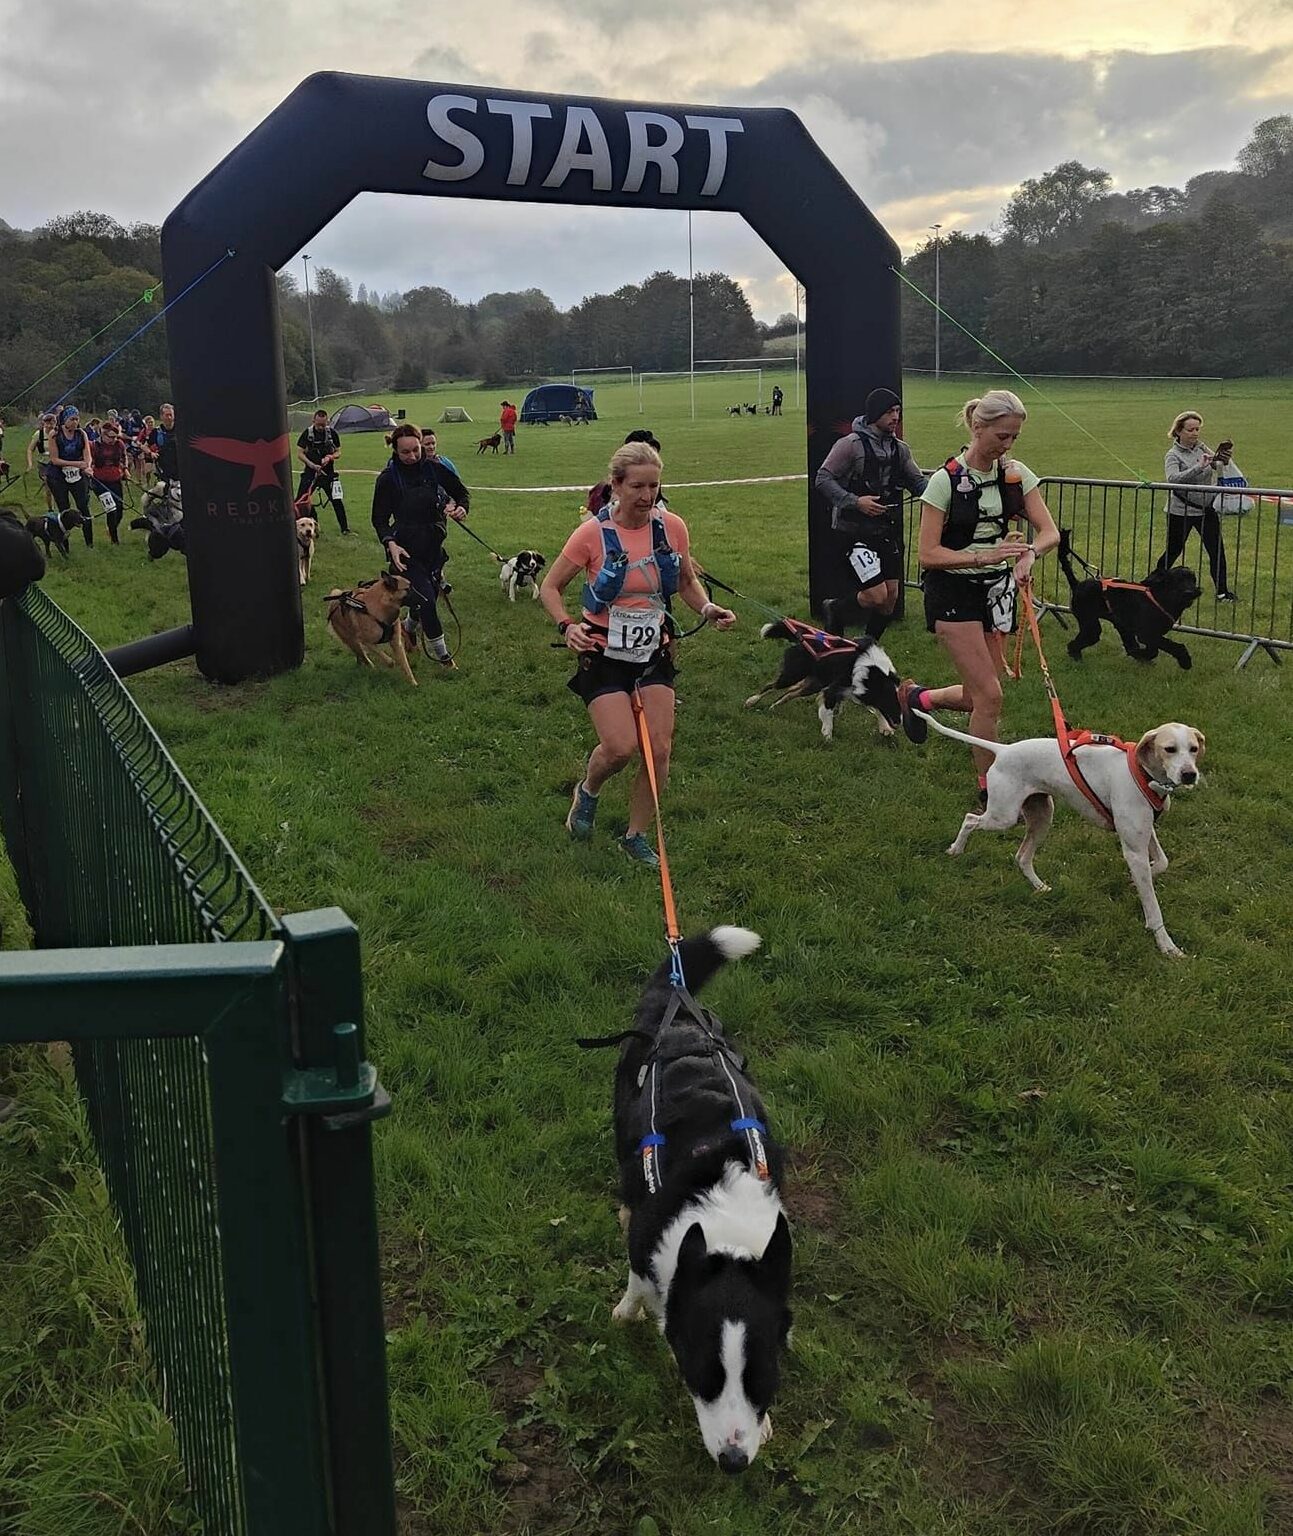 Cani0Trail Ultra race for runners and dogs